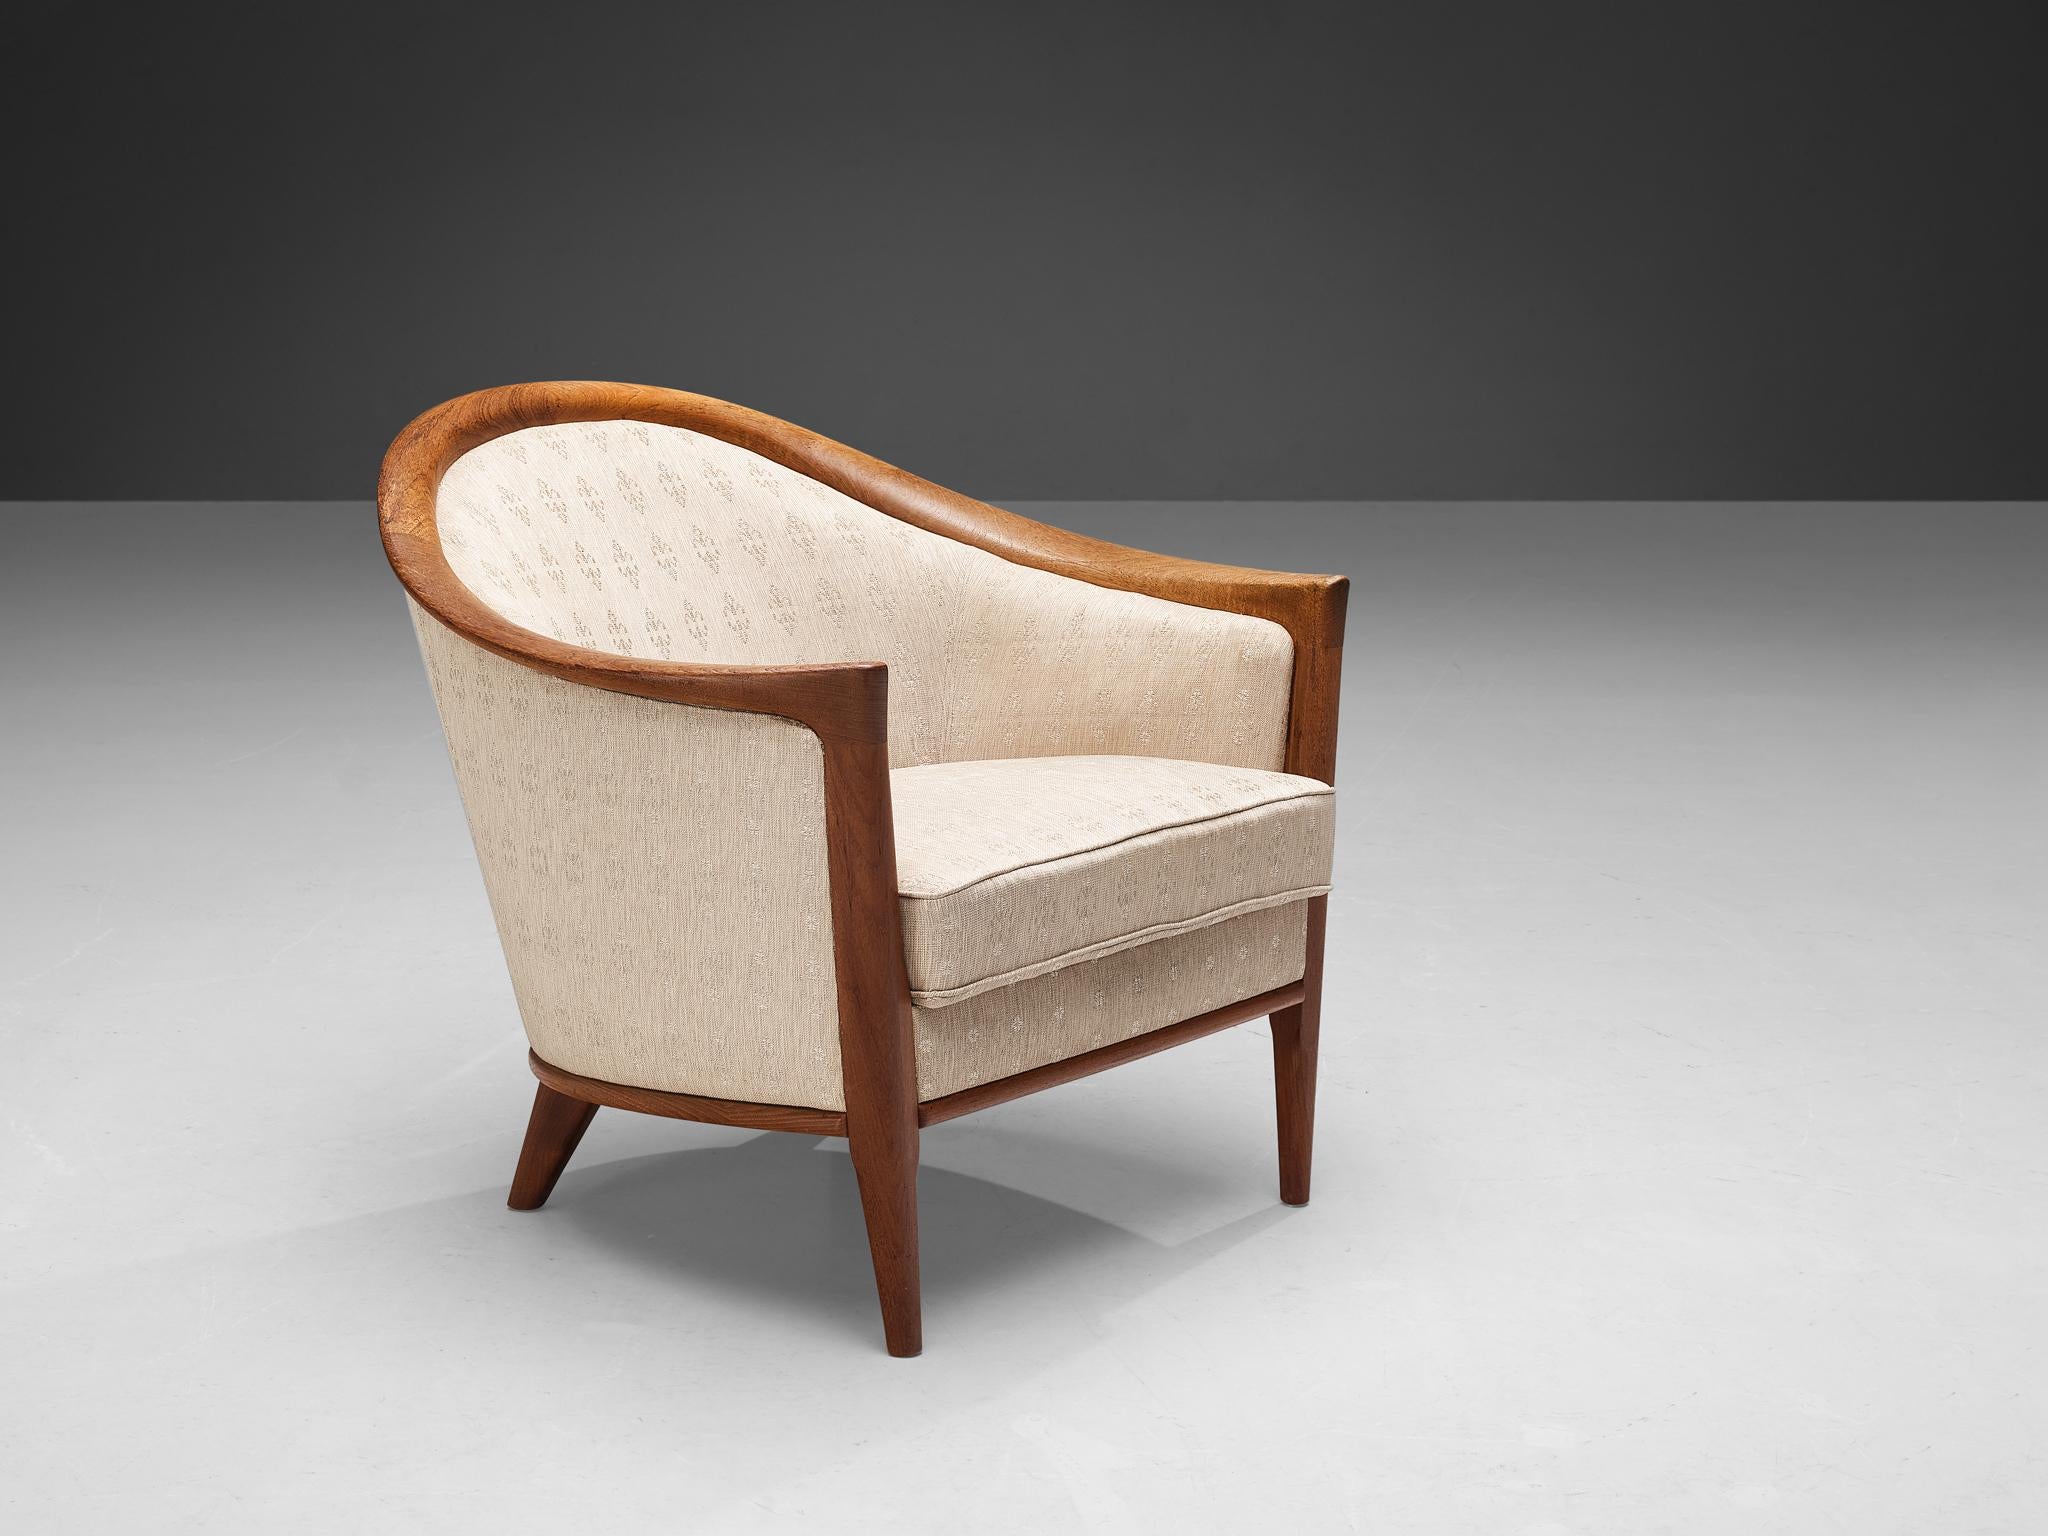 Mid-20th Century Swedish 'Farmor' Armchair in Teak and Off-White Upholstery